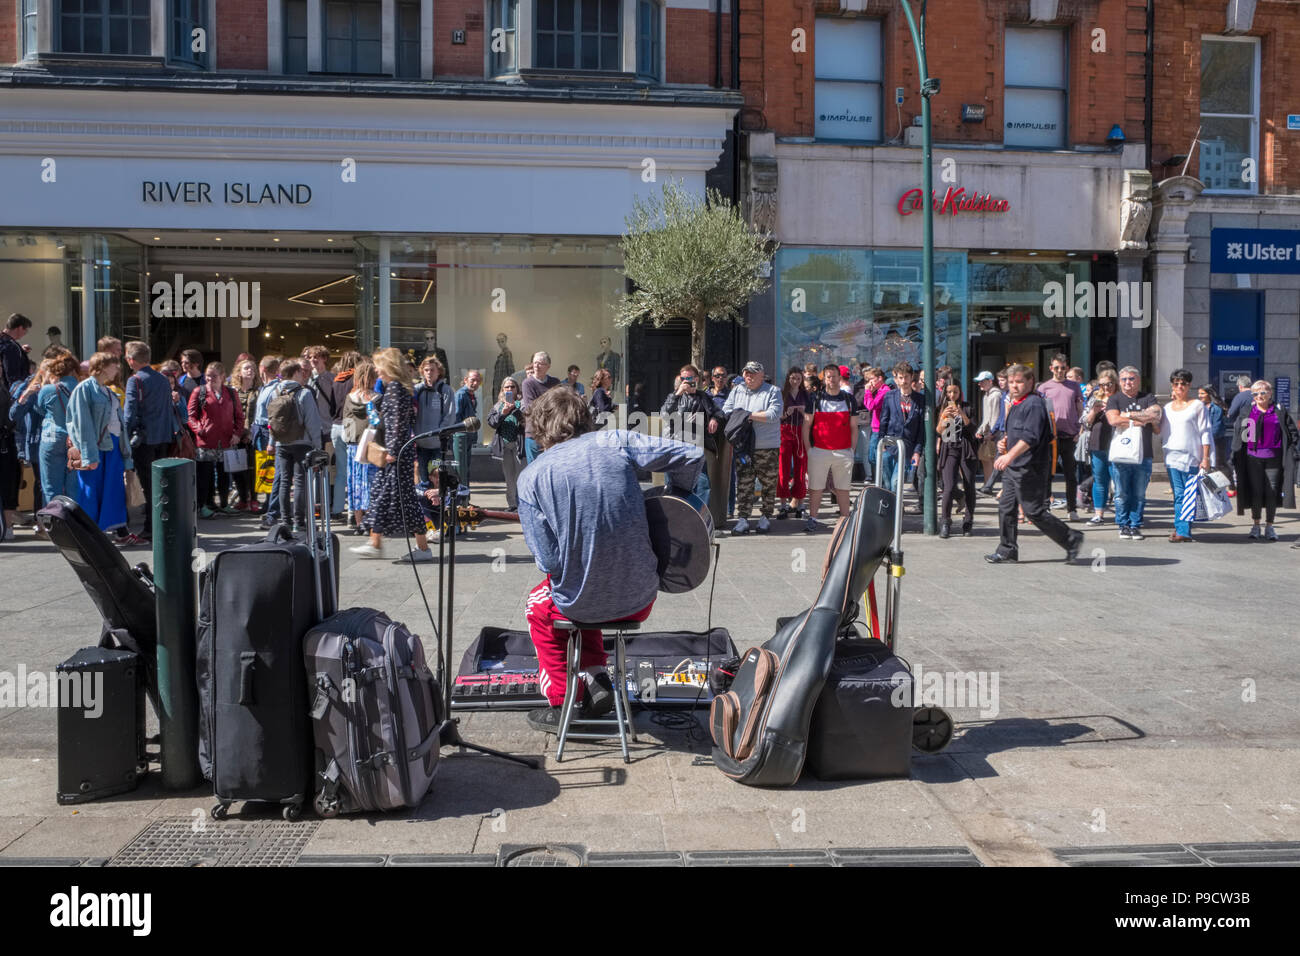 A busker musician,with a crowd of people watching the performer on Grafton Street, Dublin, Ireland, Europe Stock Photo